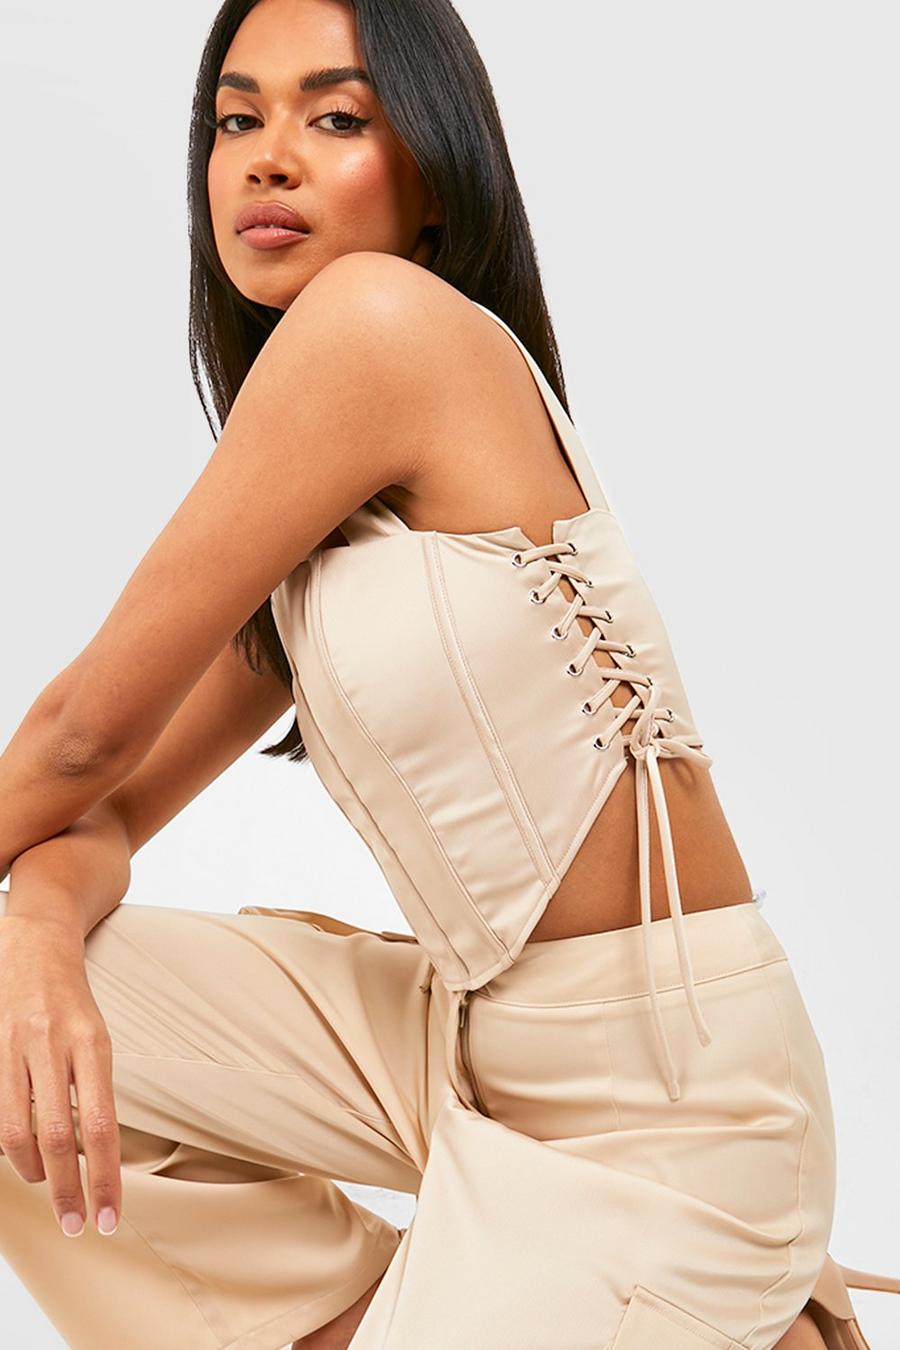 Oyster white Textured Satin Boned Lace Up Corset